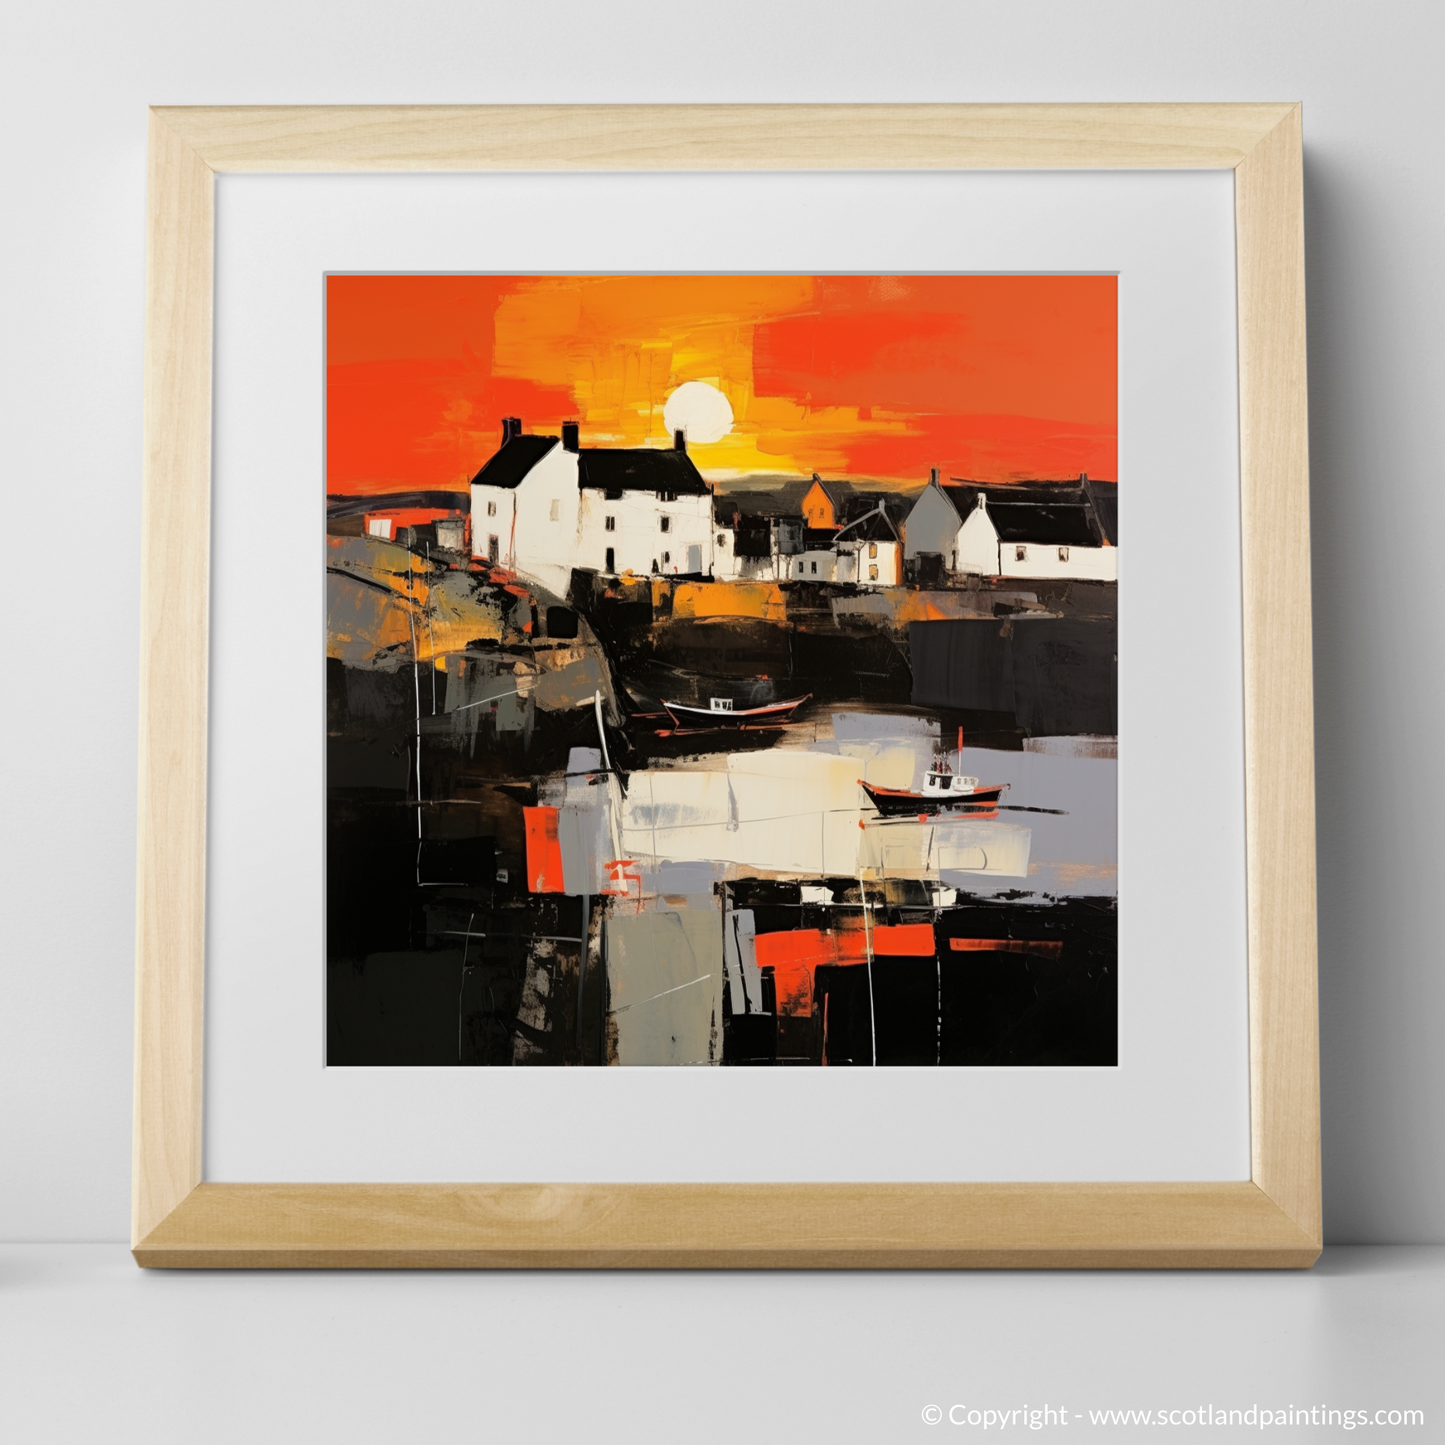 Crail Harbour at Sunset: An Abstract Scottish Coastal Masterpiece